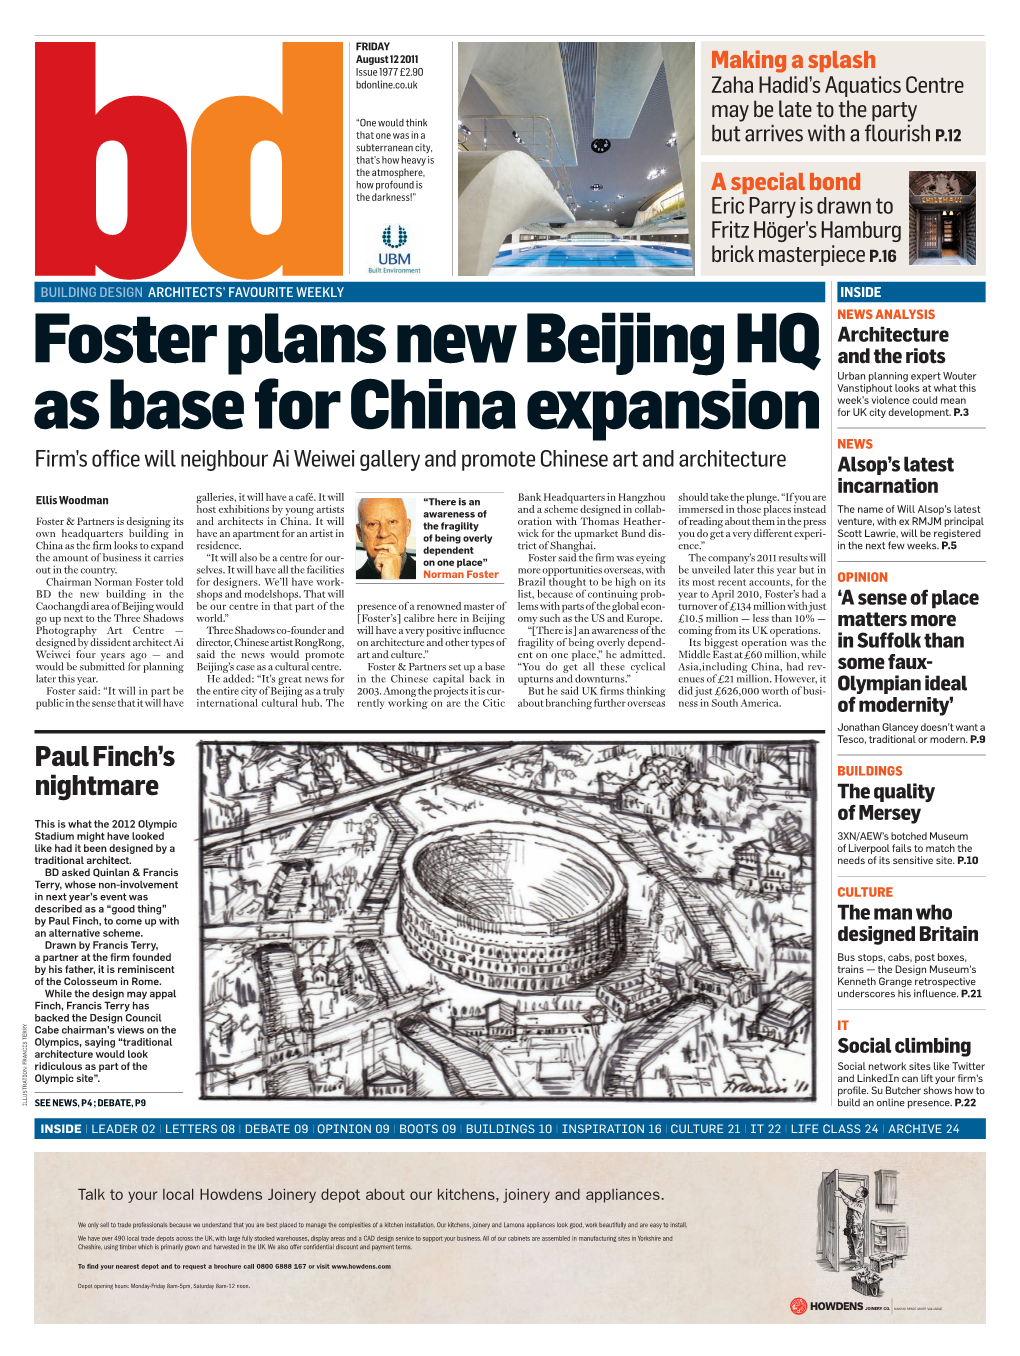 Foster Plans New Beijing HQ As Base for China Expansion